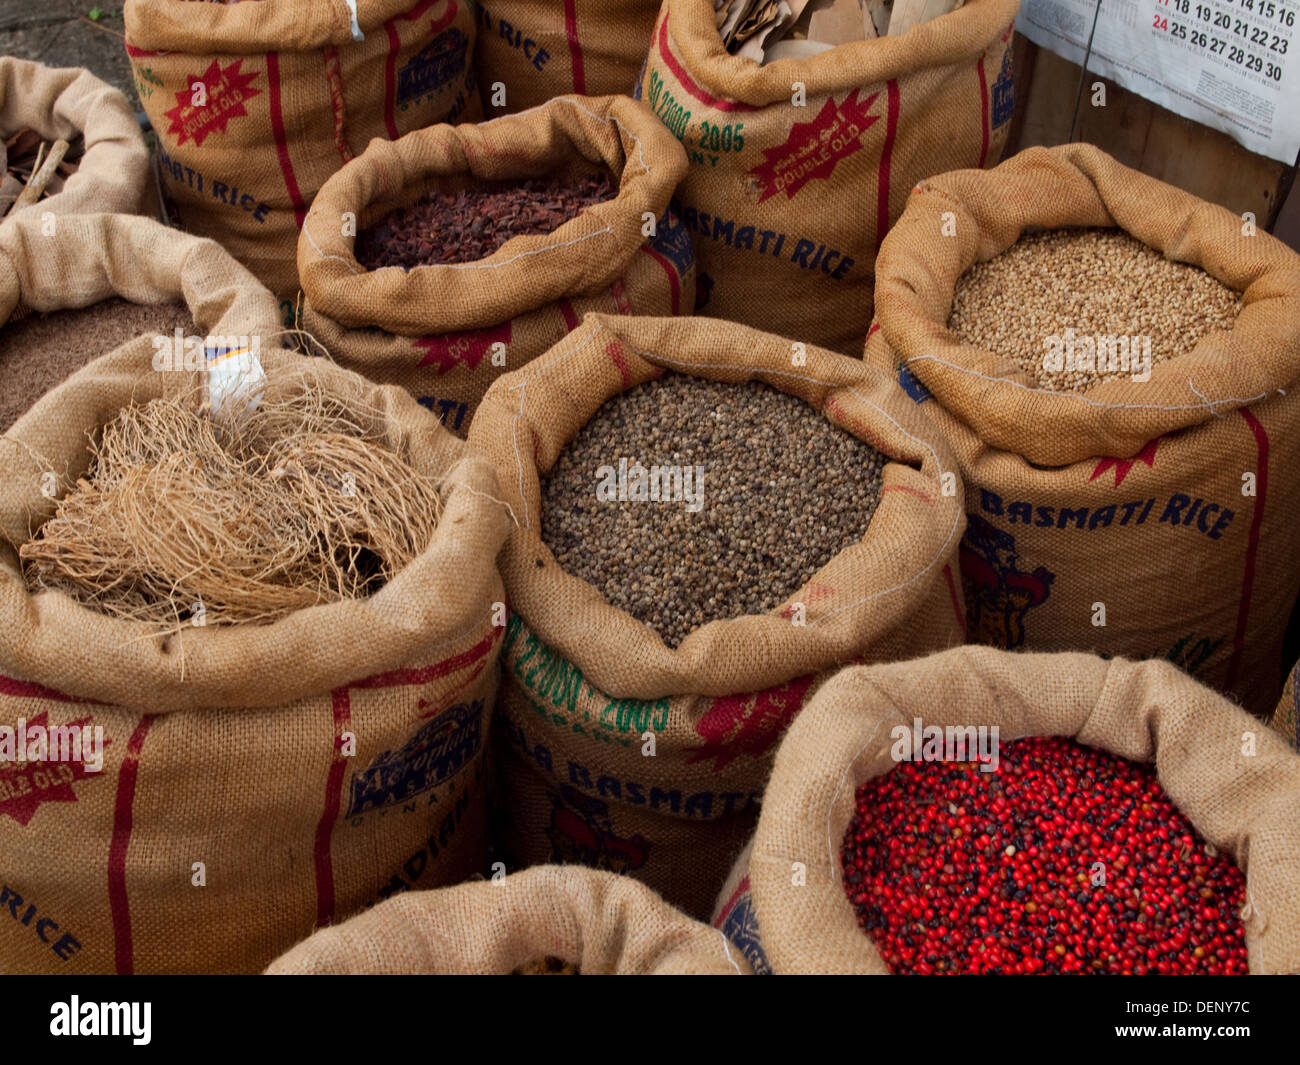 Sacks of spices in Fort Cochin, Kerala India Stock Photo